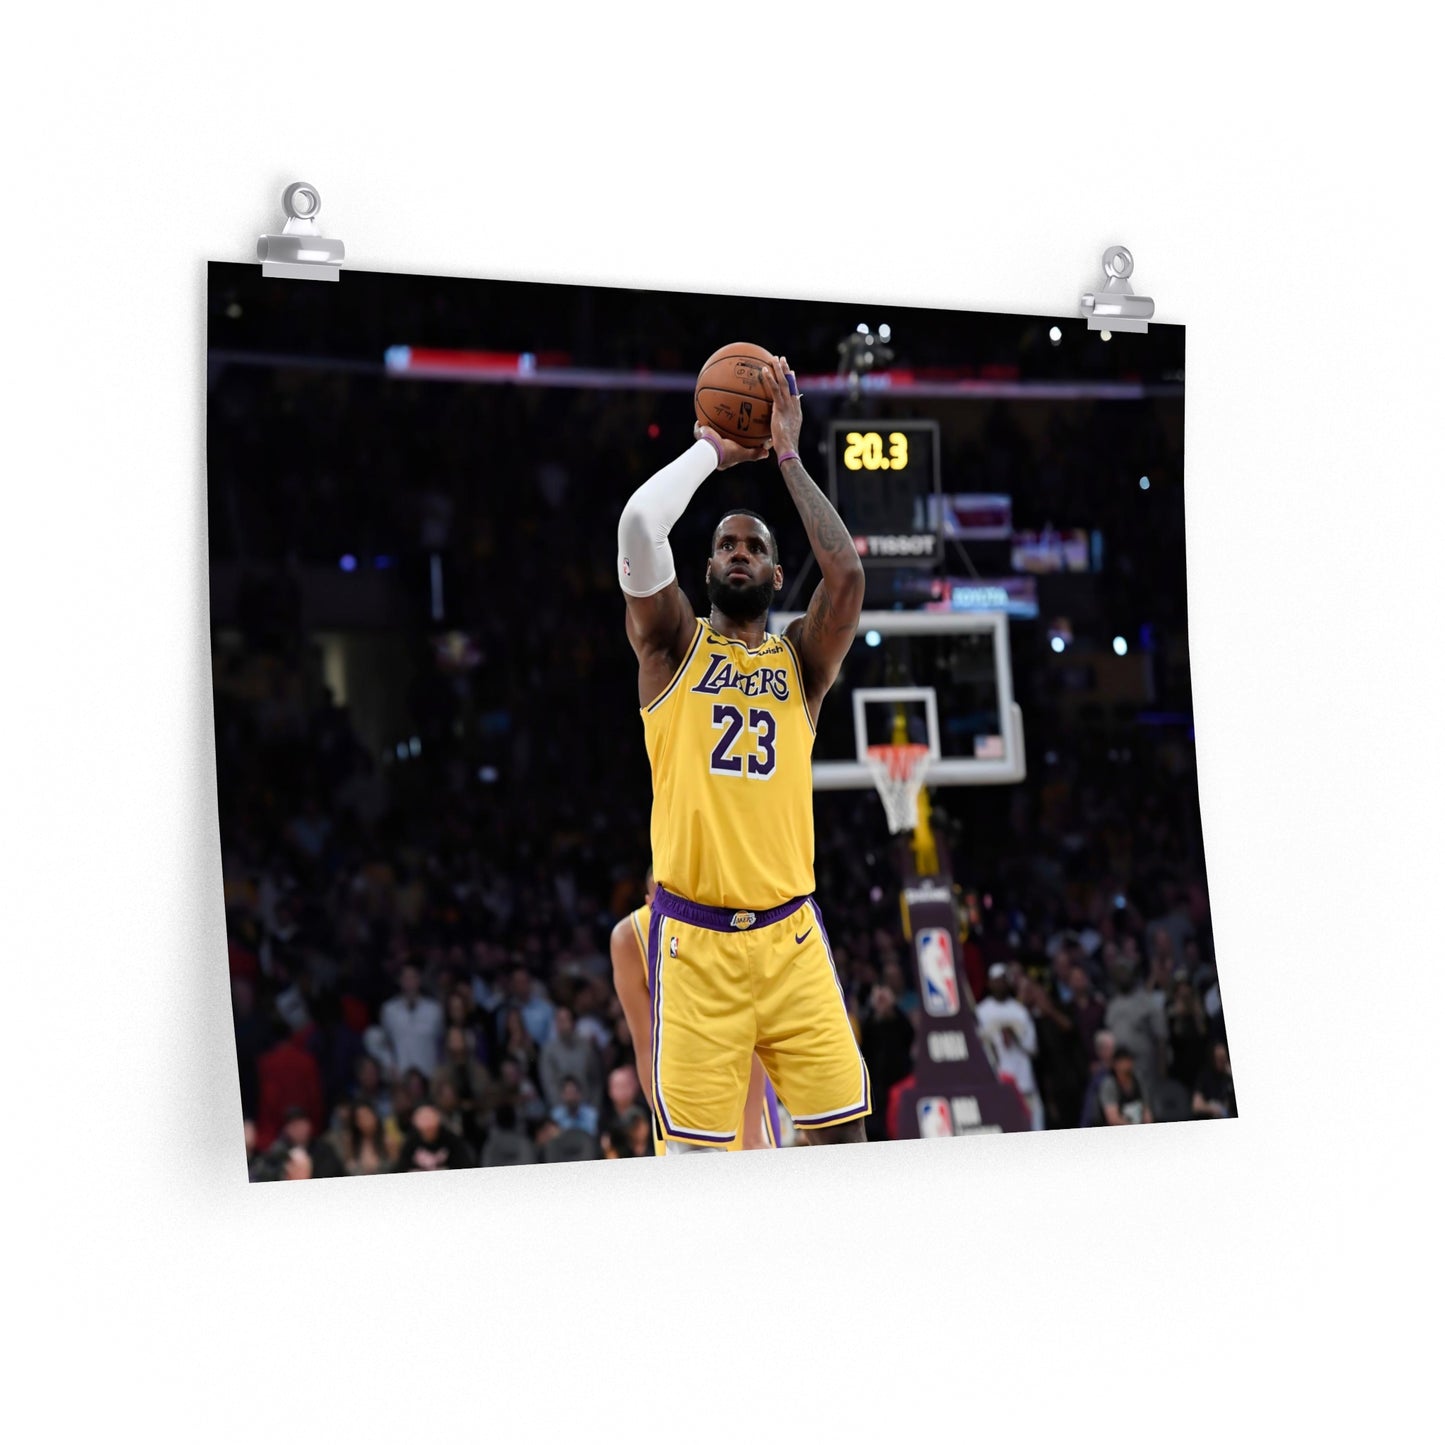 Lebron James Takes A Shot In Los Angeles Lakers 23 Jersey Poster